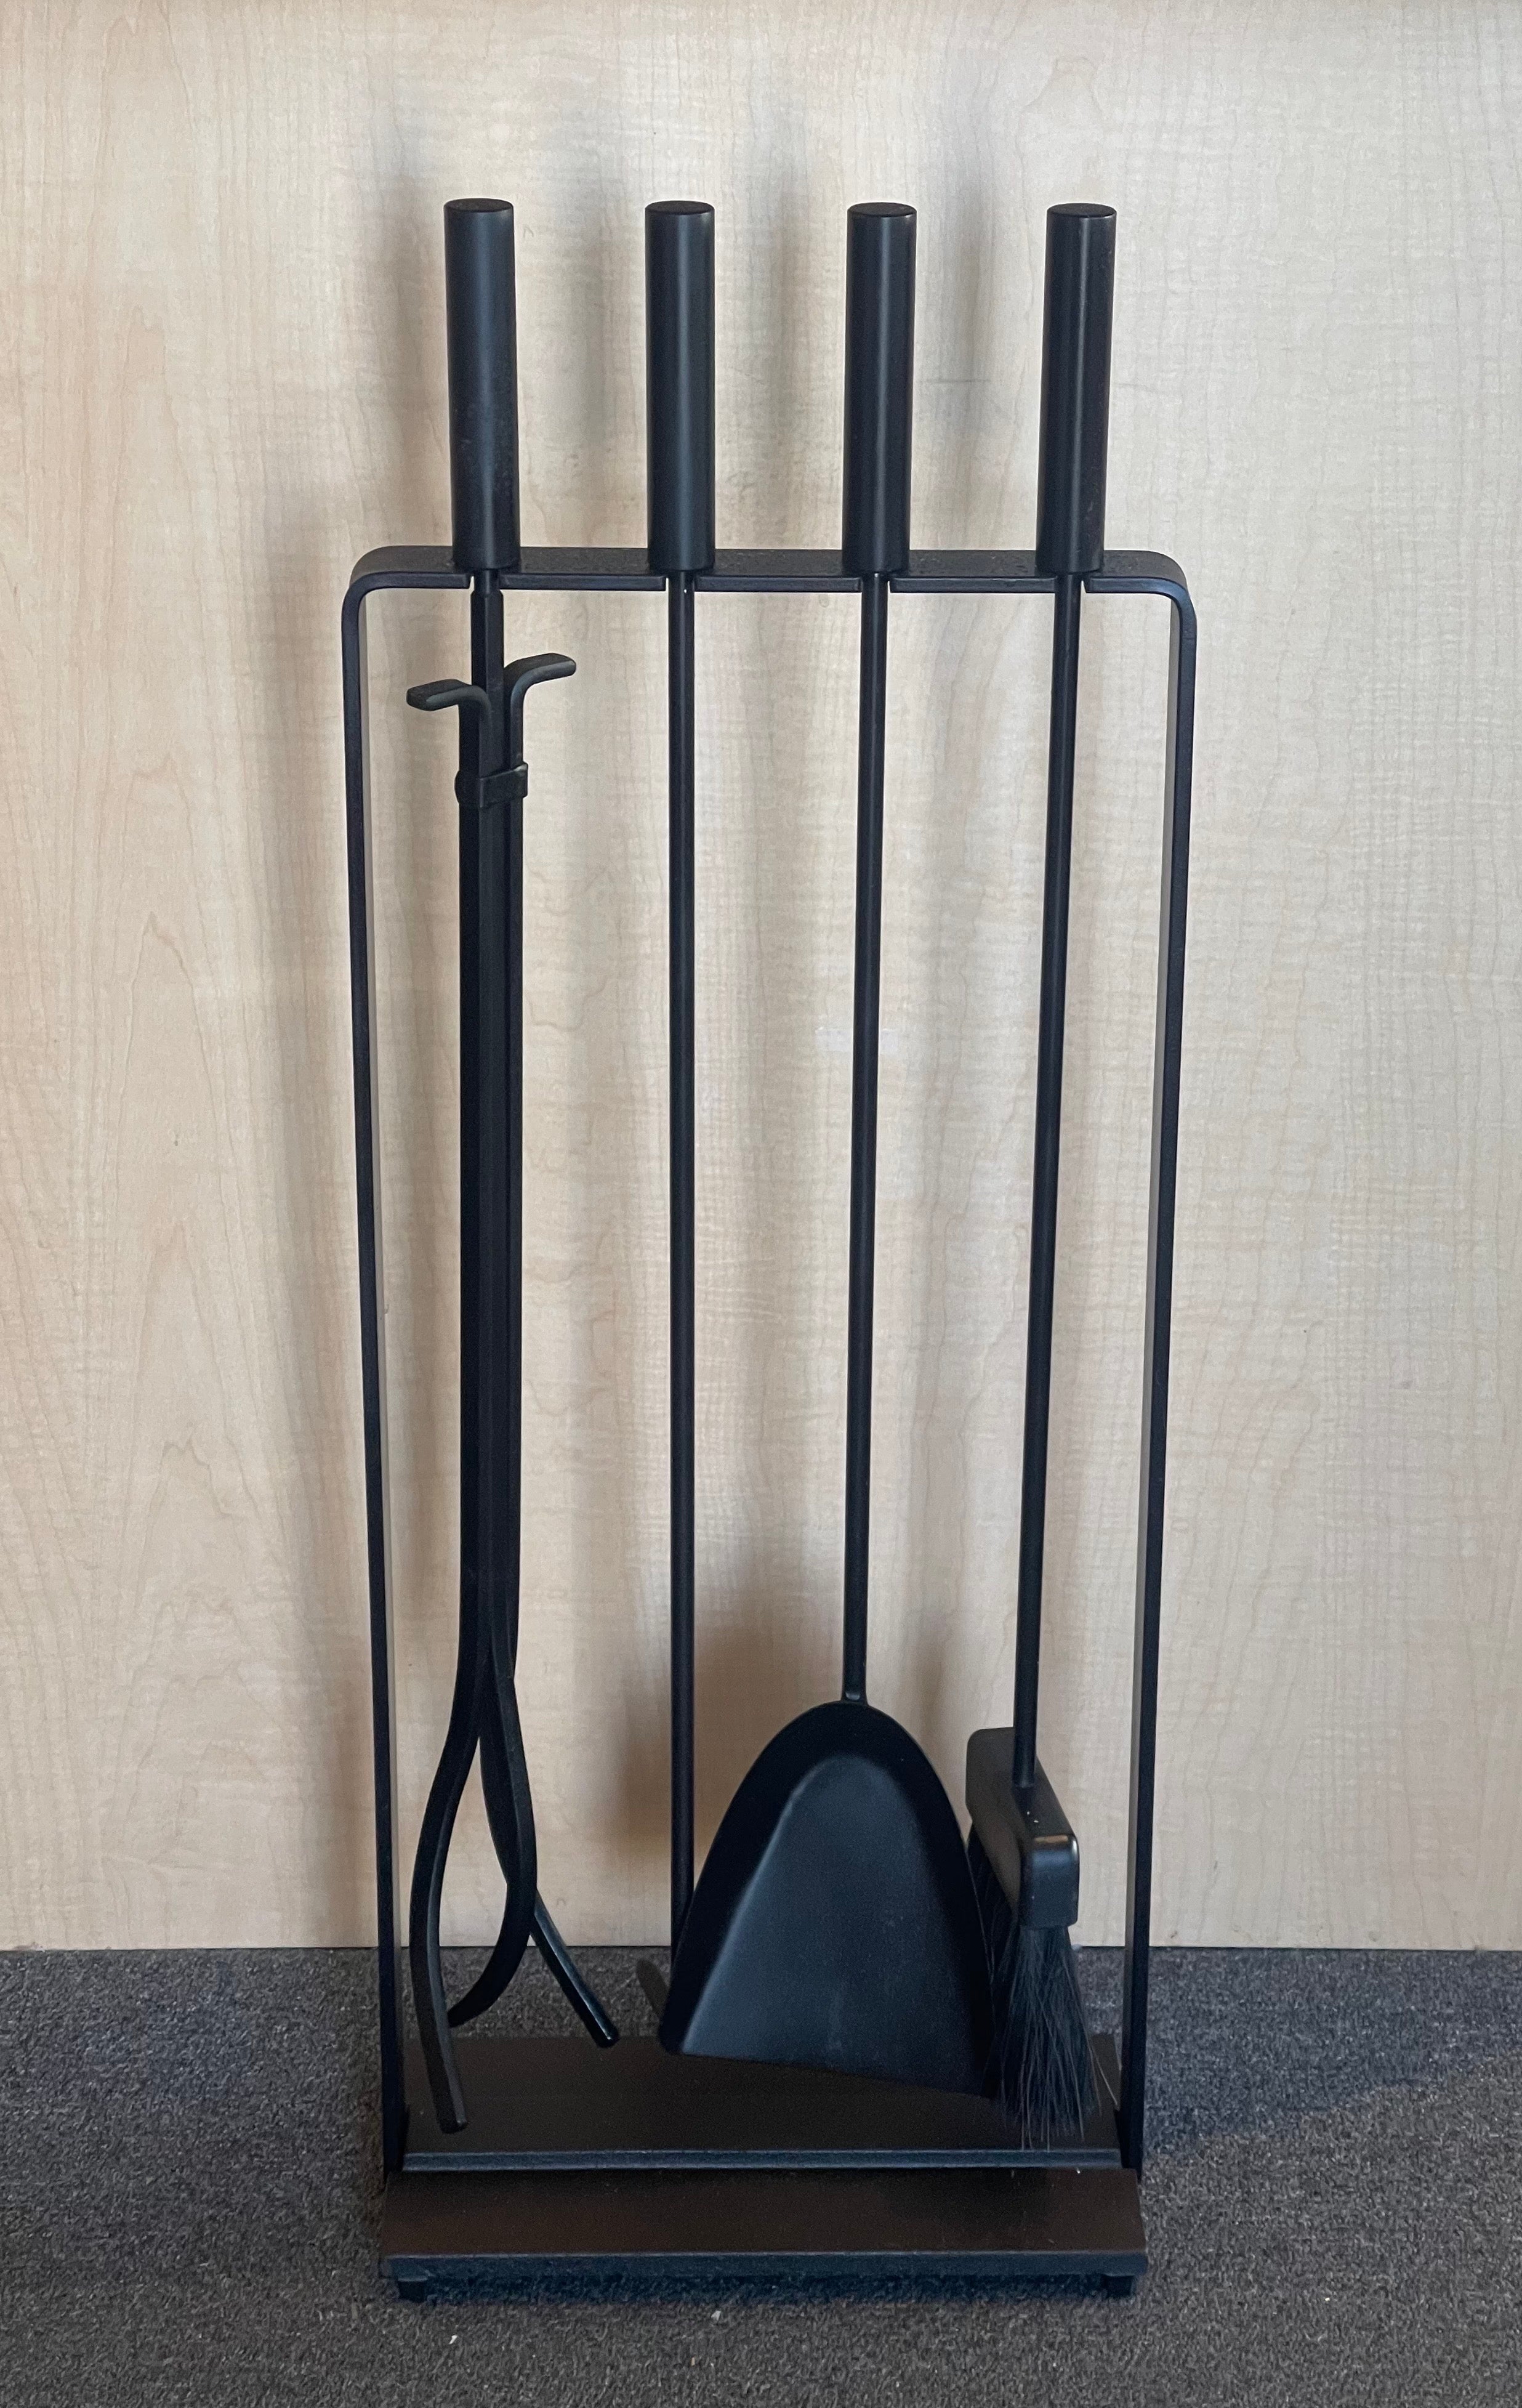 A really nice set of four modernist fireplace tools with stand by Pilgrim Manufacturing, circa 1970s. There are four tools (shovel, brush, log holder and poker) and a single stand in good vintage condition. The set is very heavy and well made; it